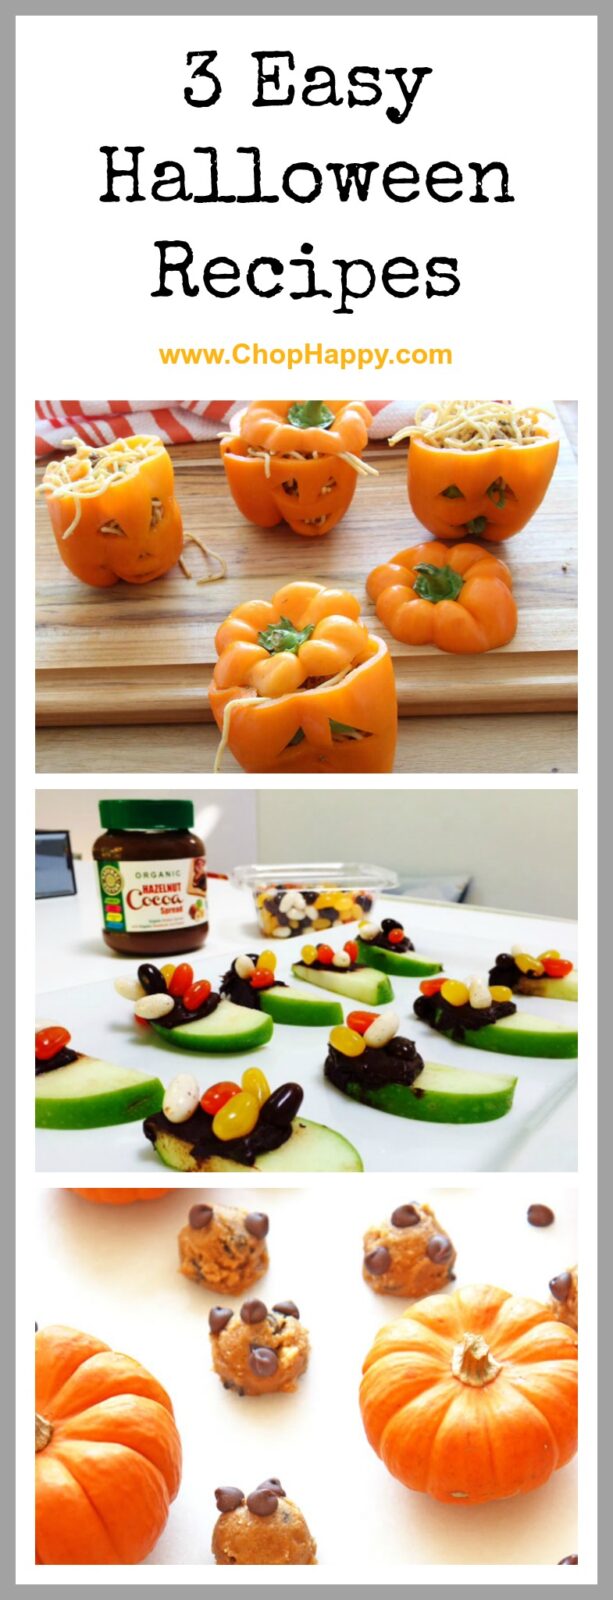 3 Easy Halloween Recipe- that are super simple, fun, and DIY Halloween recipes for the whole family. www.ChopHappy.com